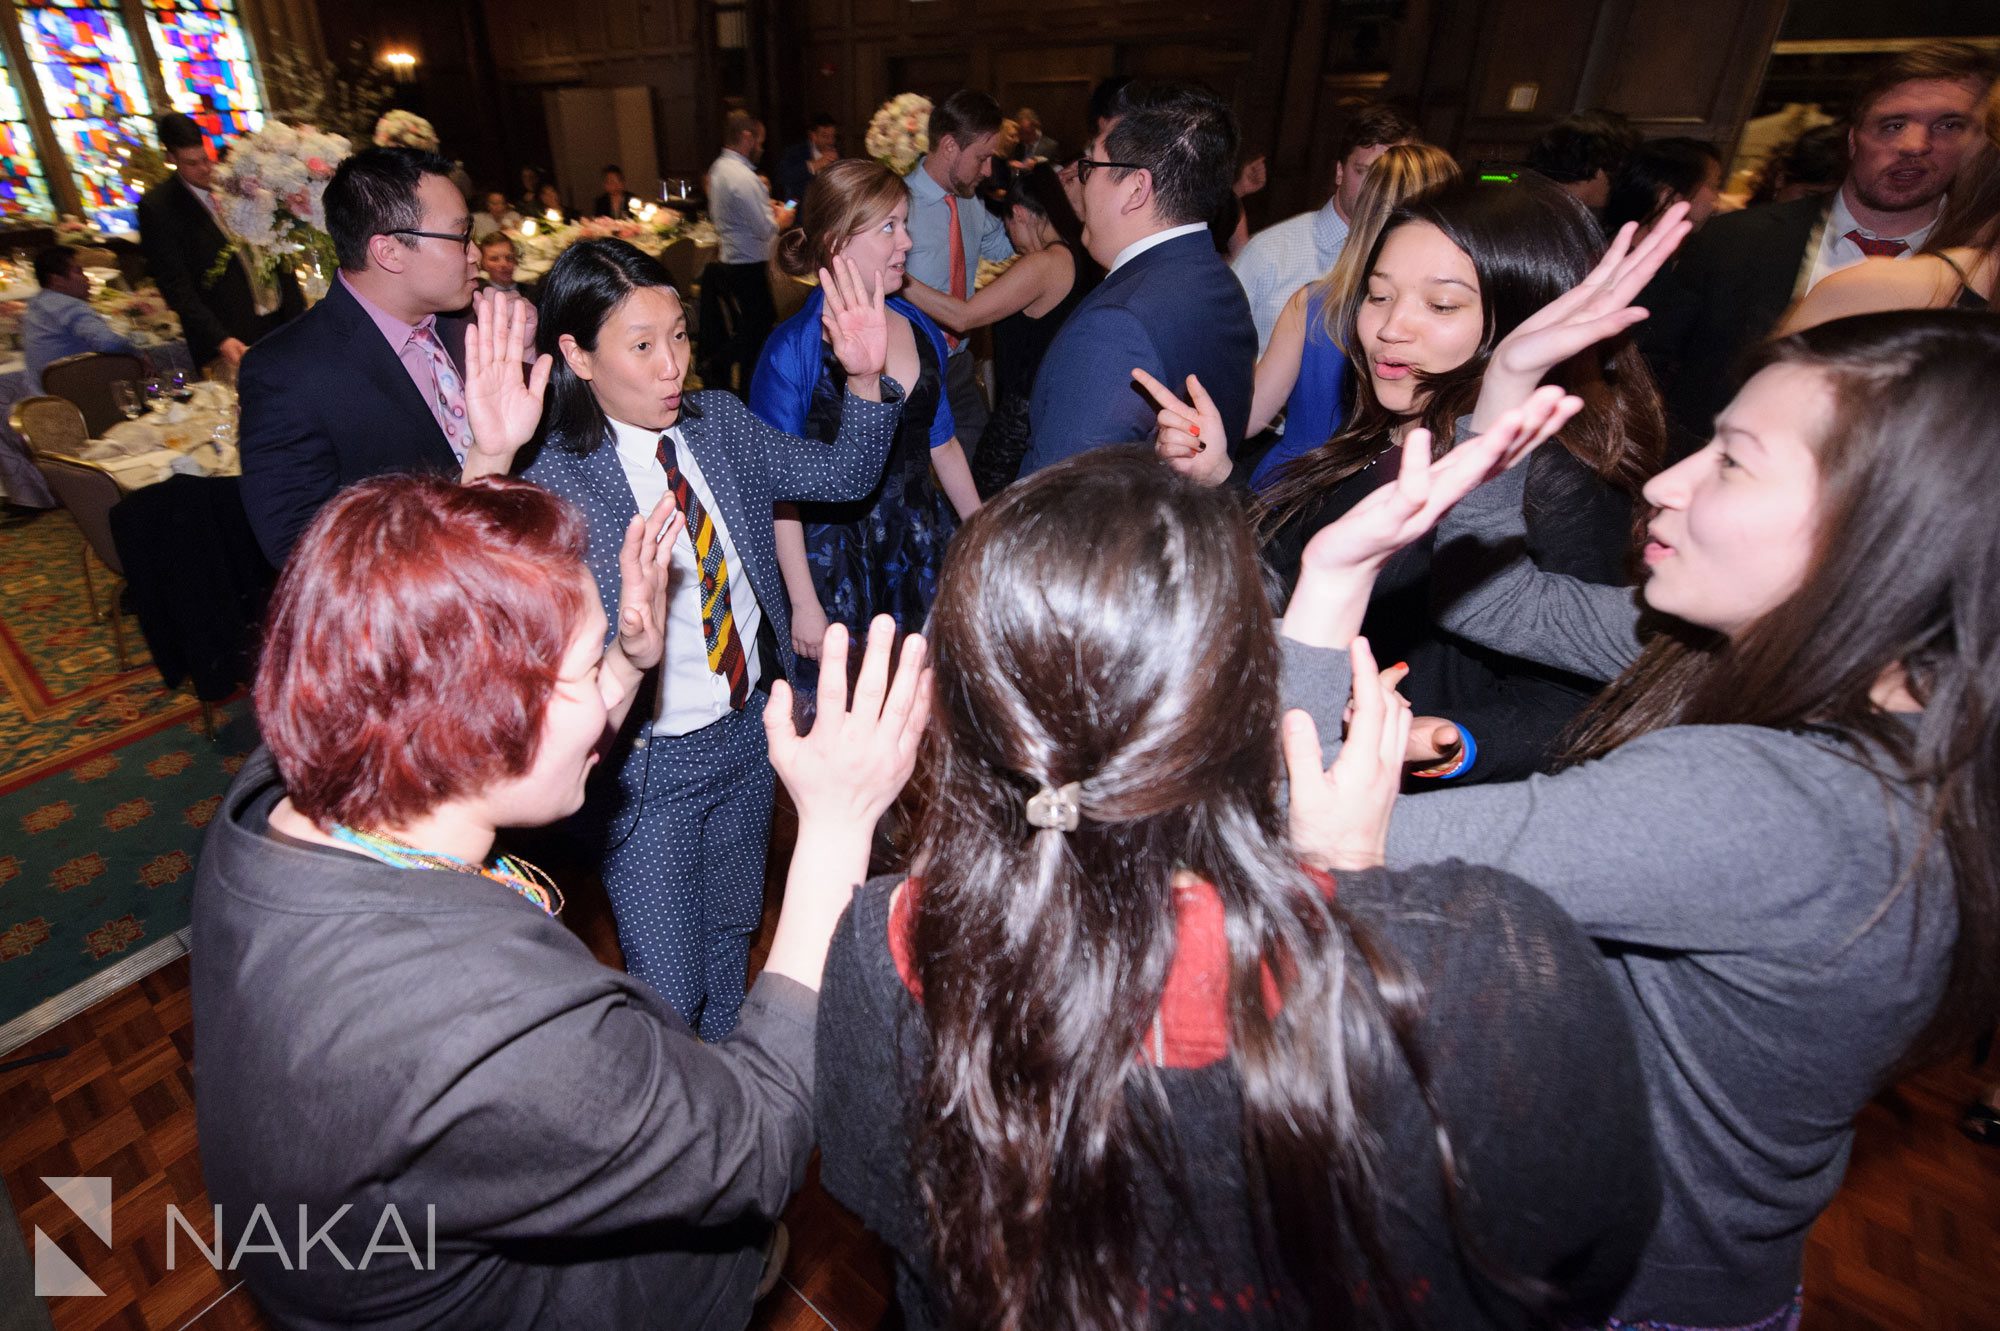 Intercontinental-Magnificent-Mile-wedding-reception-pictures-nakai-photography-59